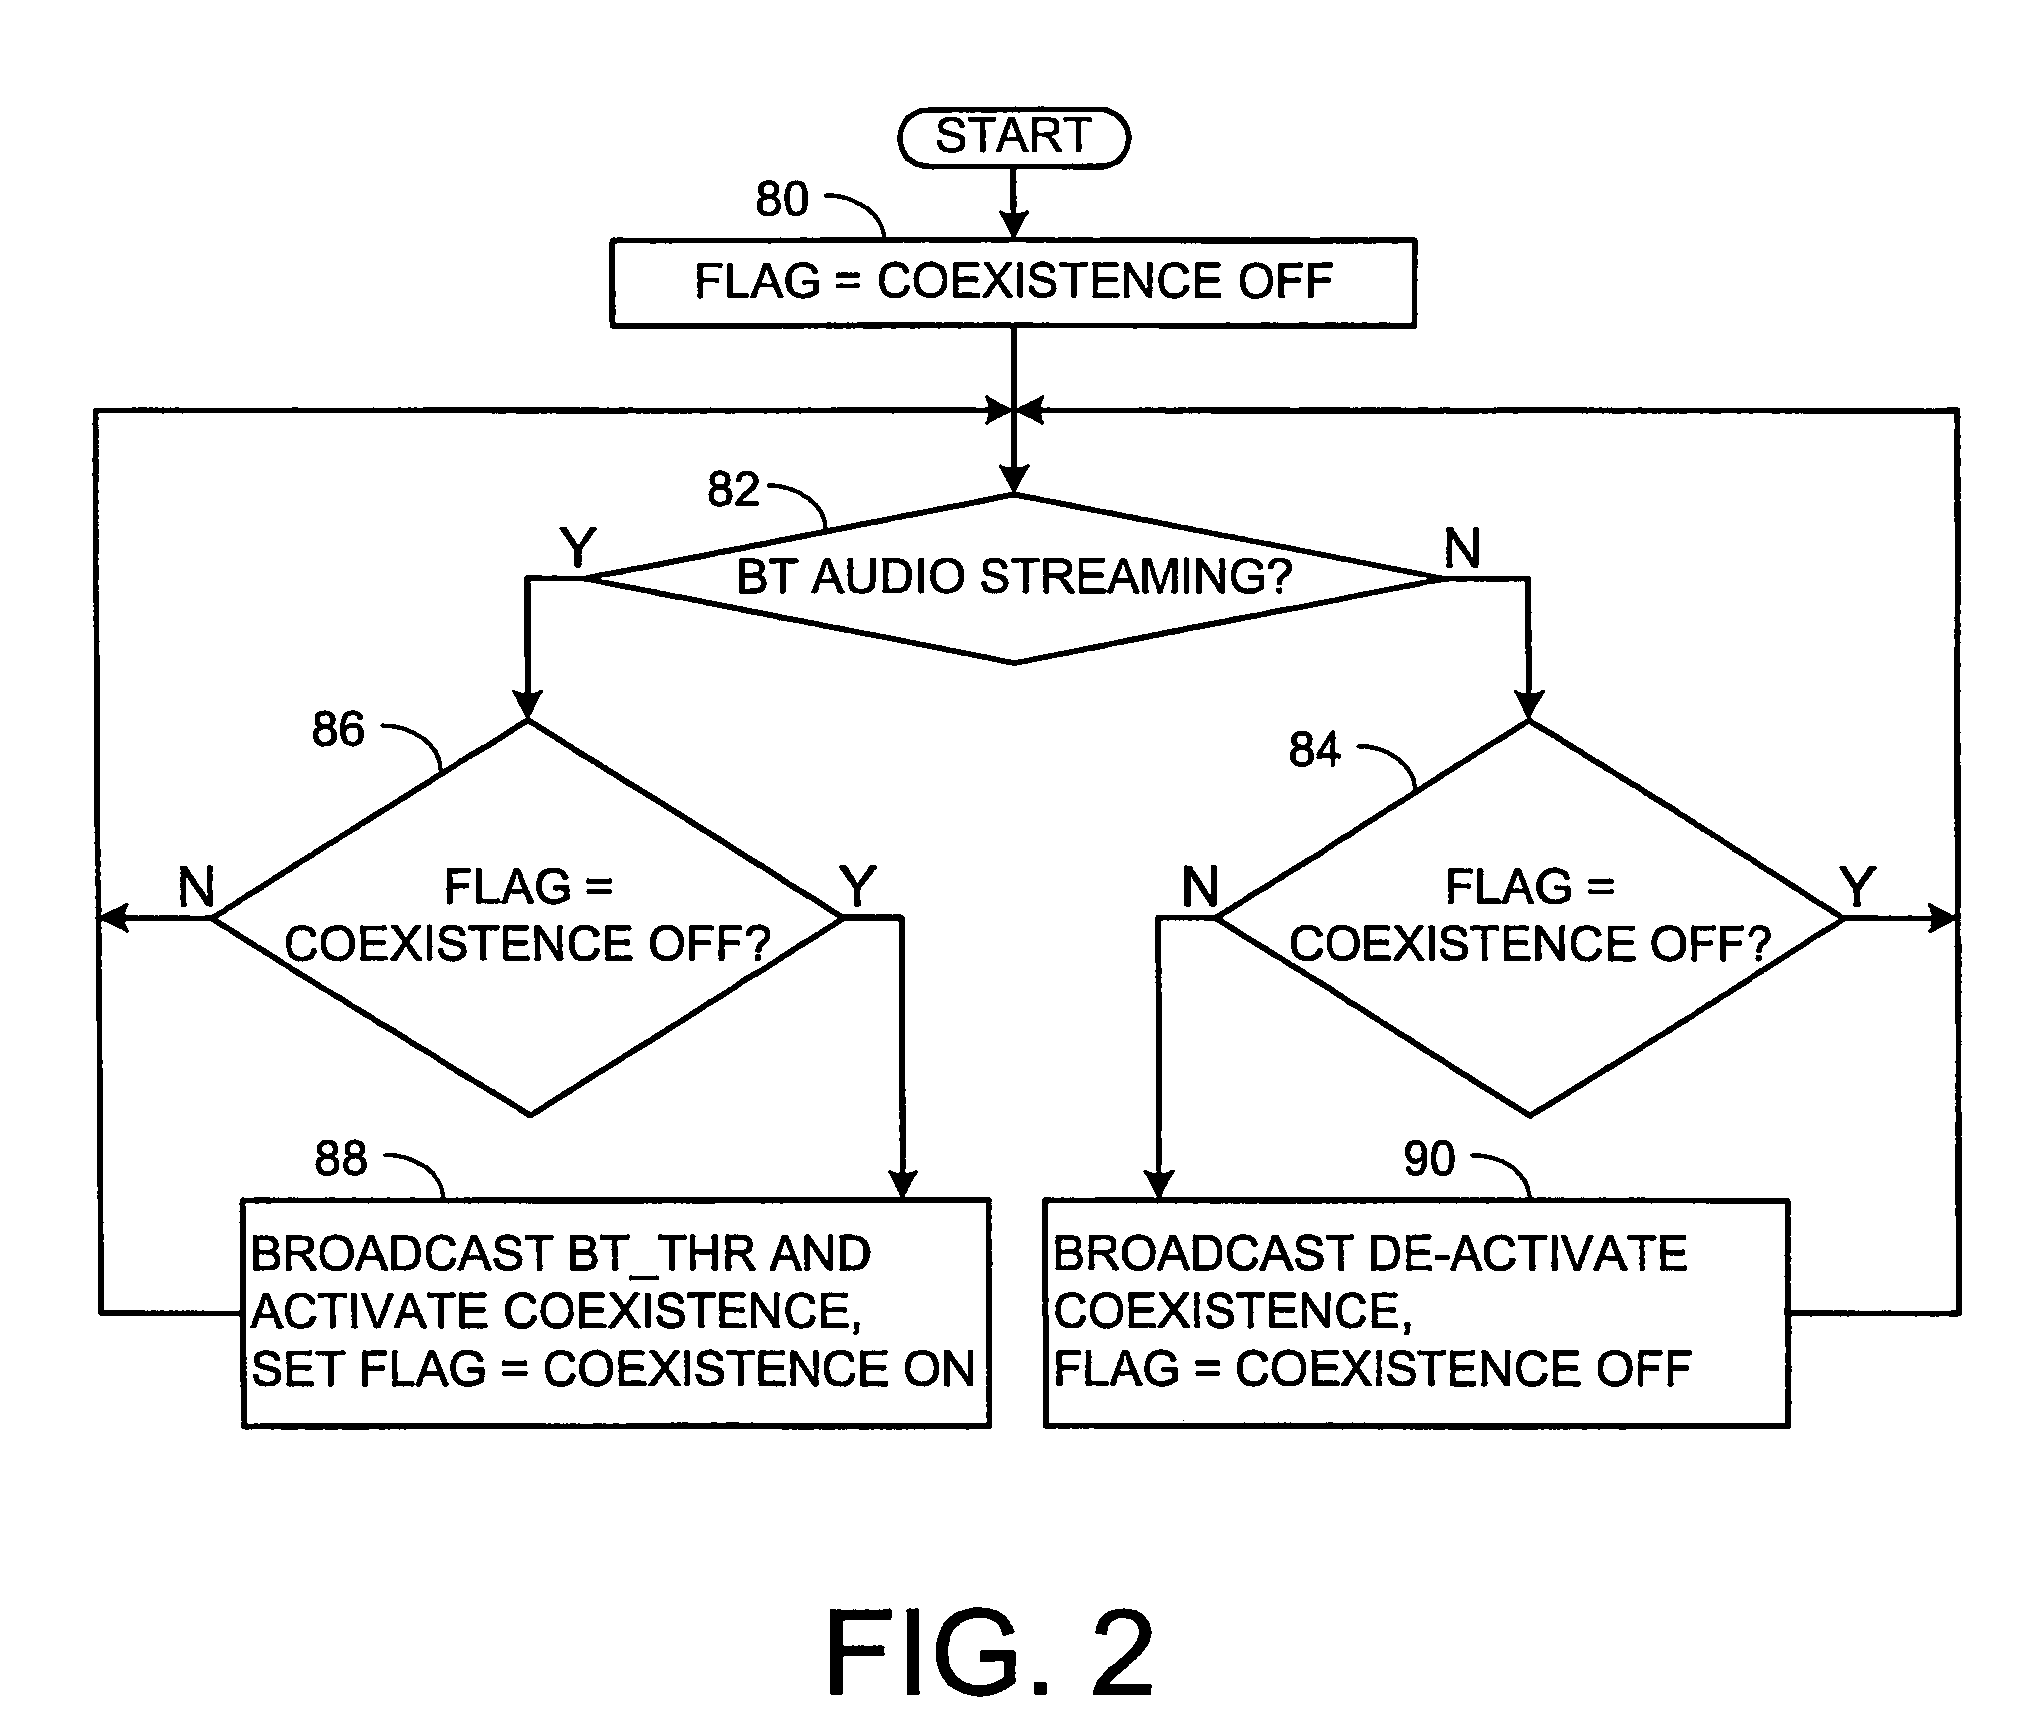 Apparatus and methods for coexistence of collocated wireless local area network and bluetooth® based on dynamic fragmentation of WLAN packets